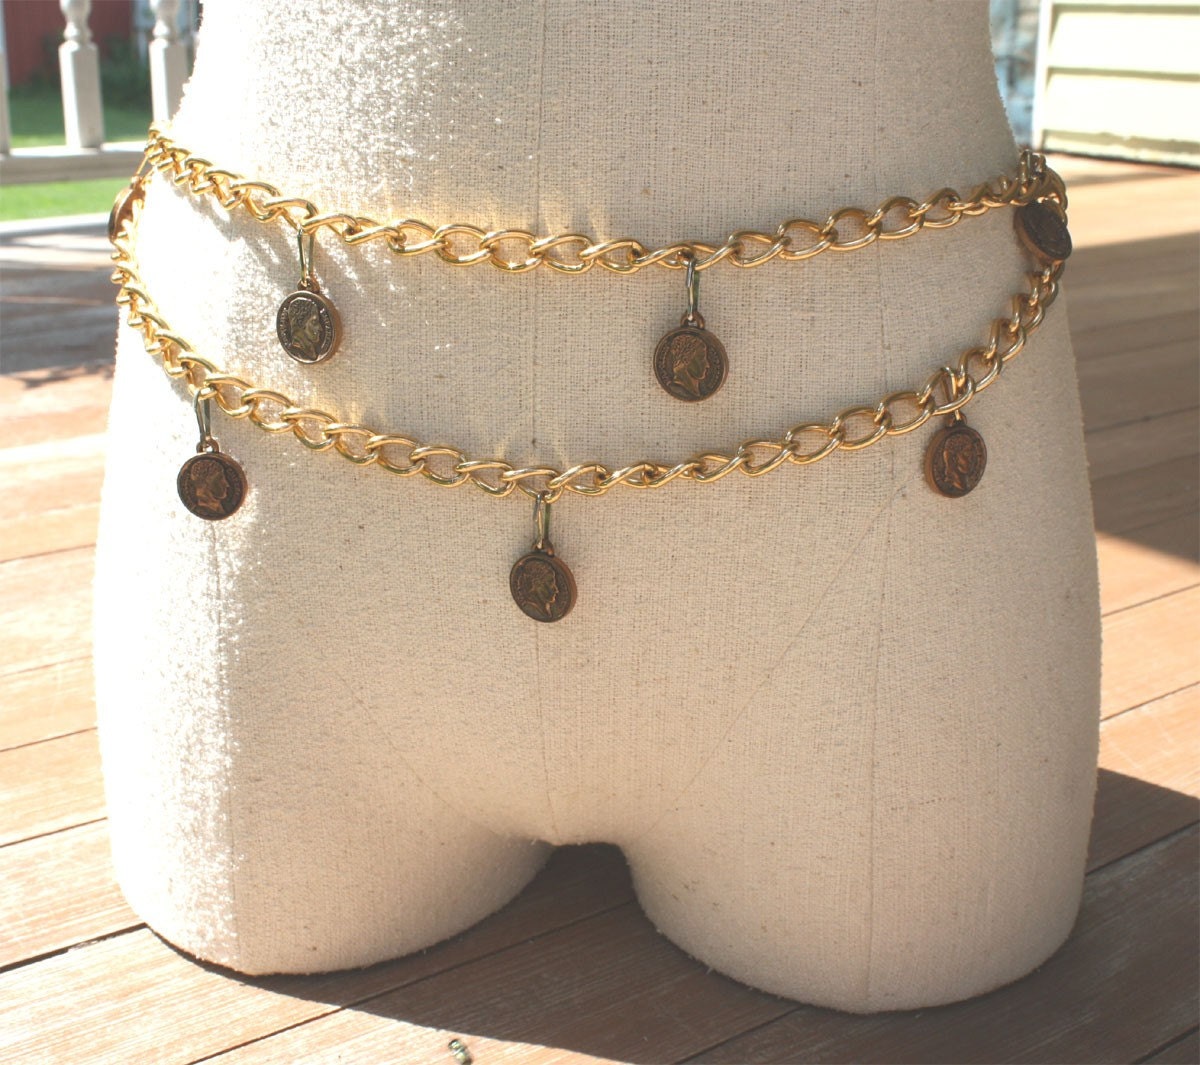 Gypsy Woman Gold Coin Chain Belt by fcstudiojewelry on Etsy